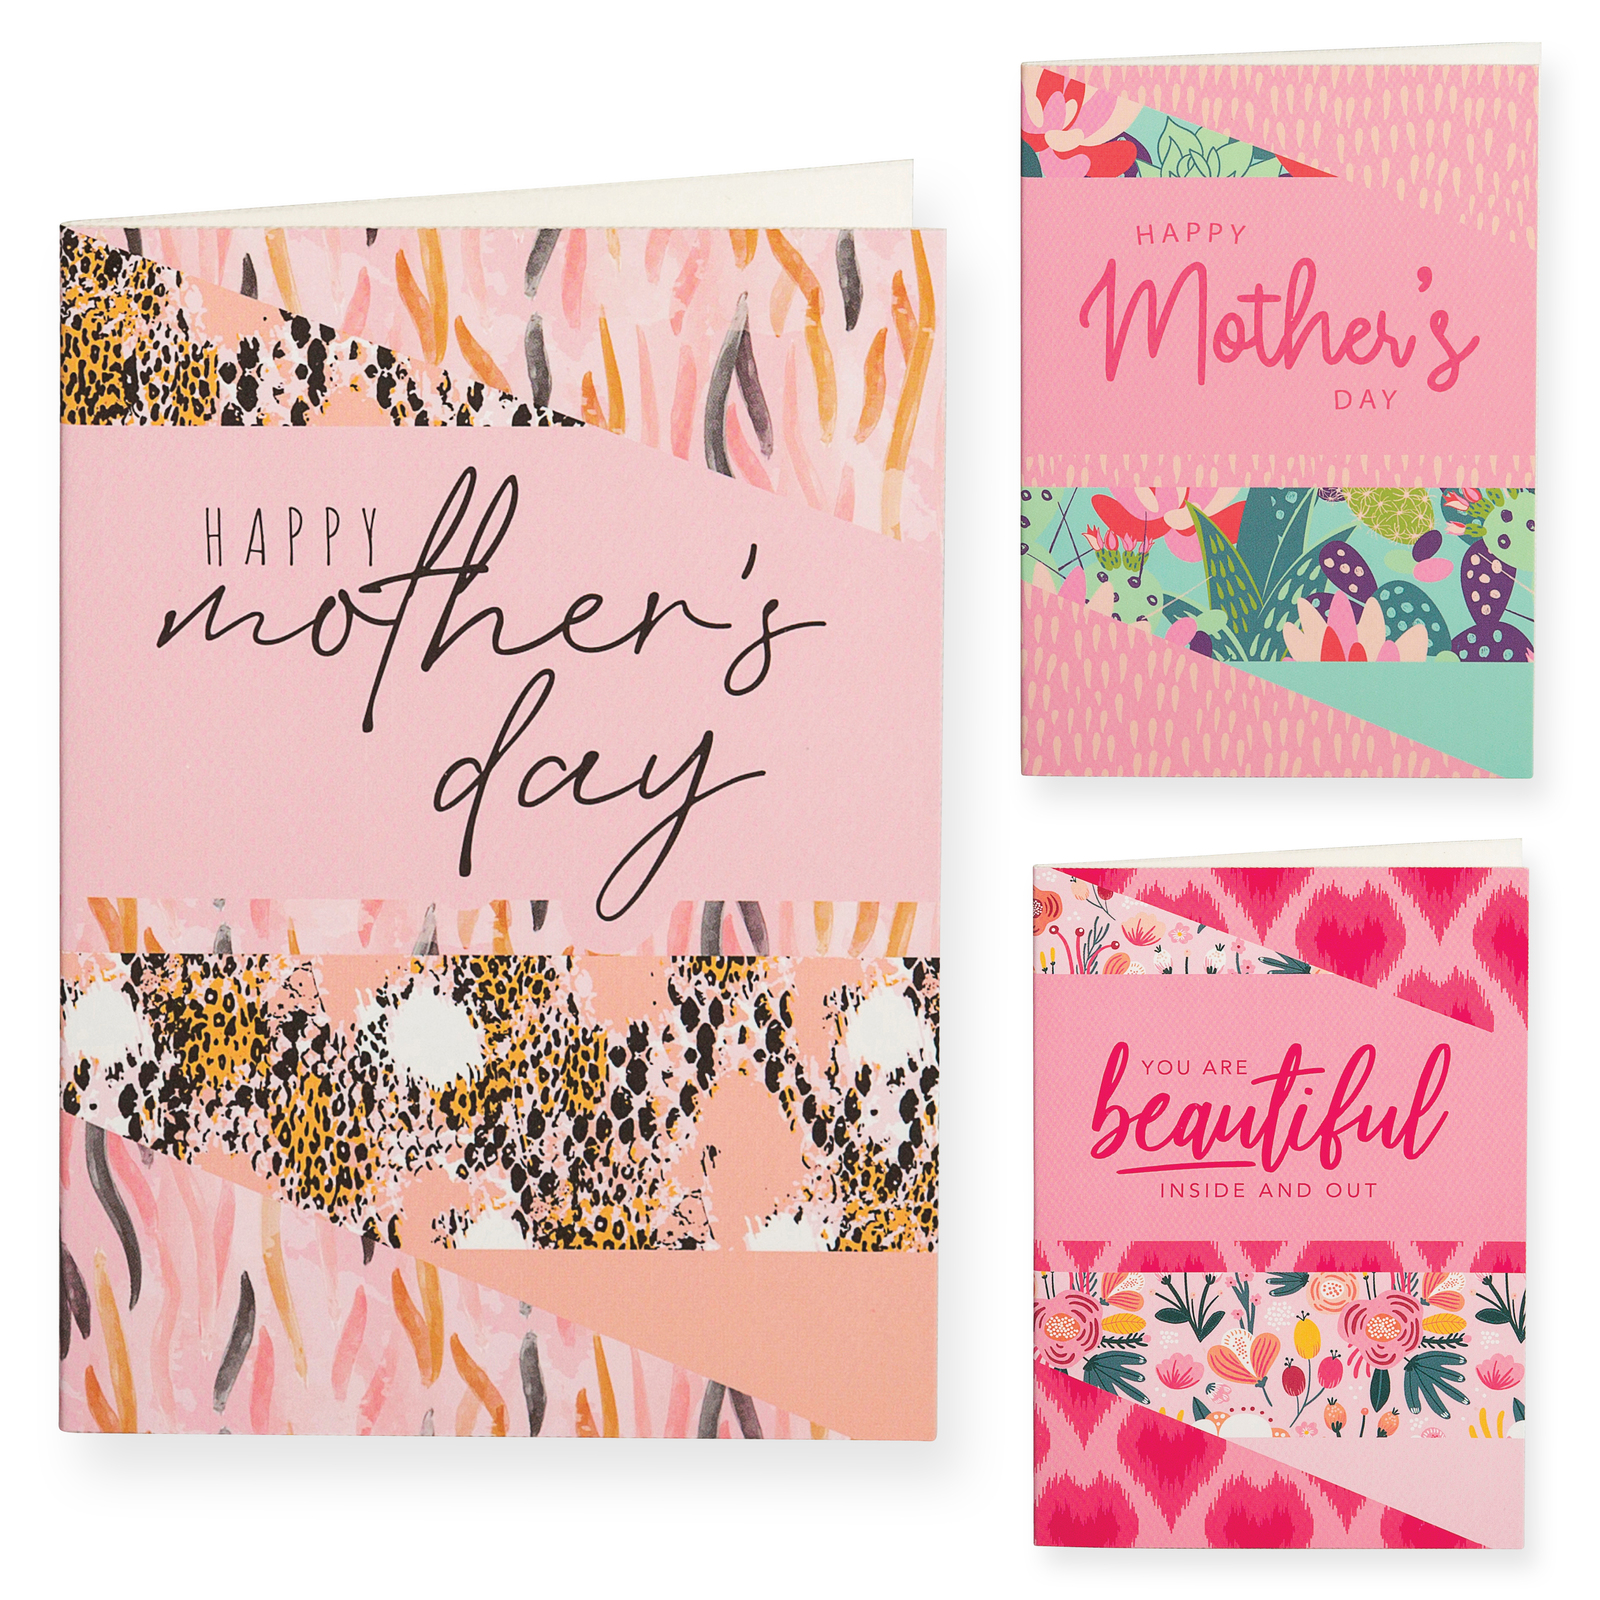 Gift Card with Envelope - Pack of 18 ($0.50 ea)